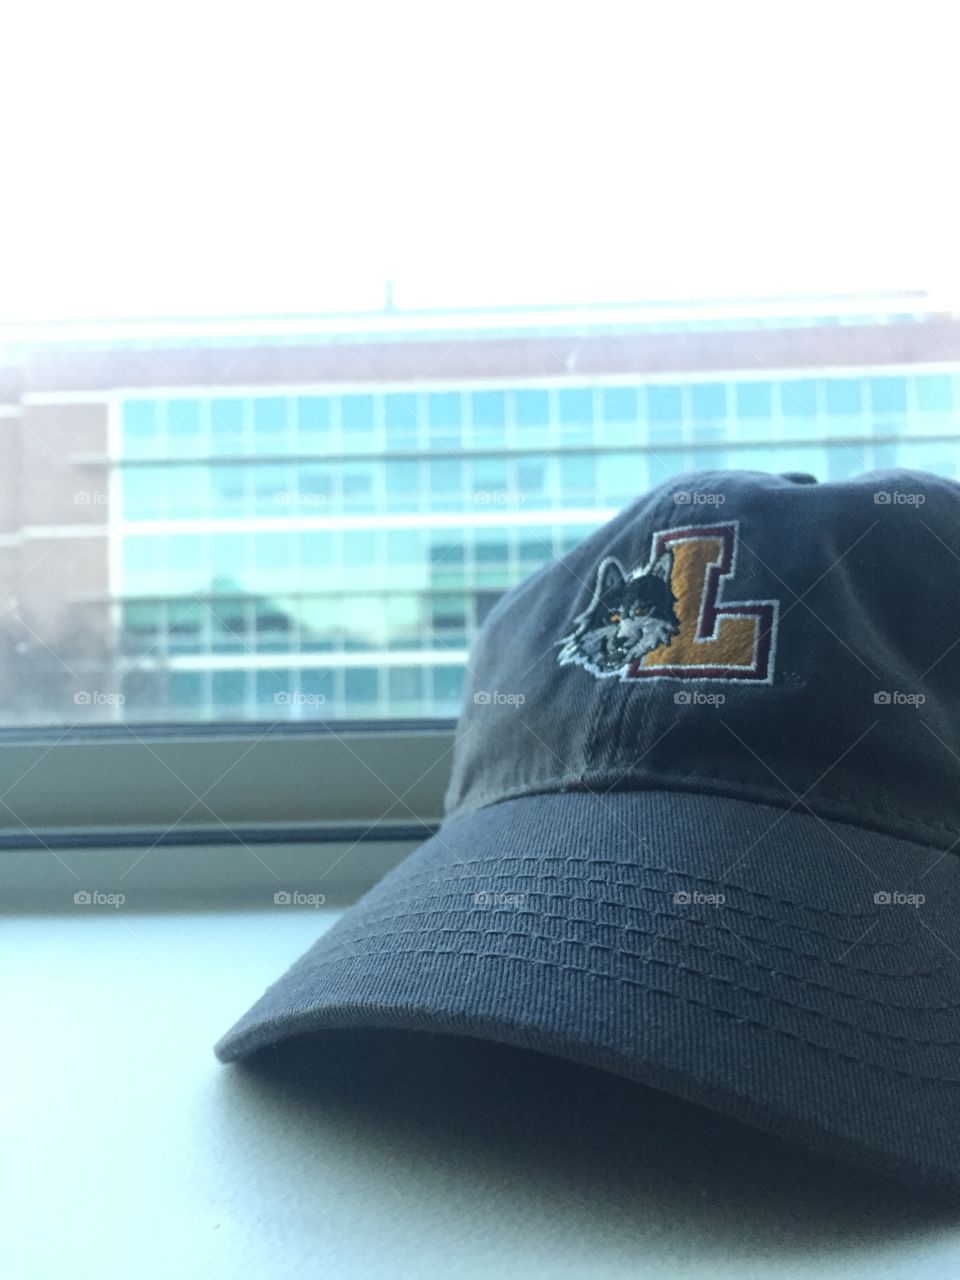 It’s a great day to be a Rambler! We are all so proud of our basketball team, and what better way to celebrate our achievments than by wearing Loyola merch? “Worship, work and win!” ~ Sister Jean